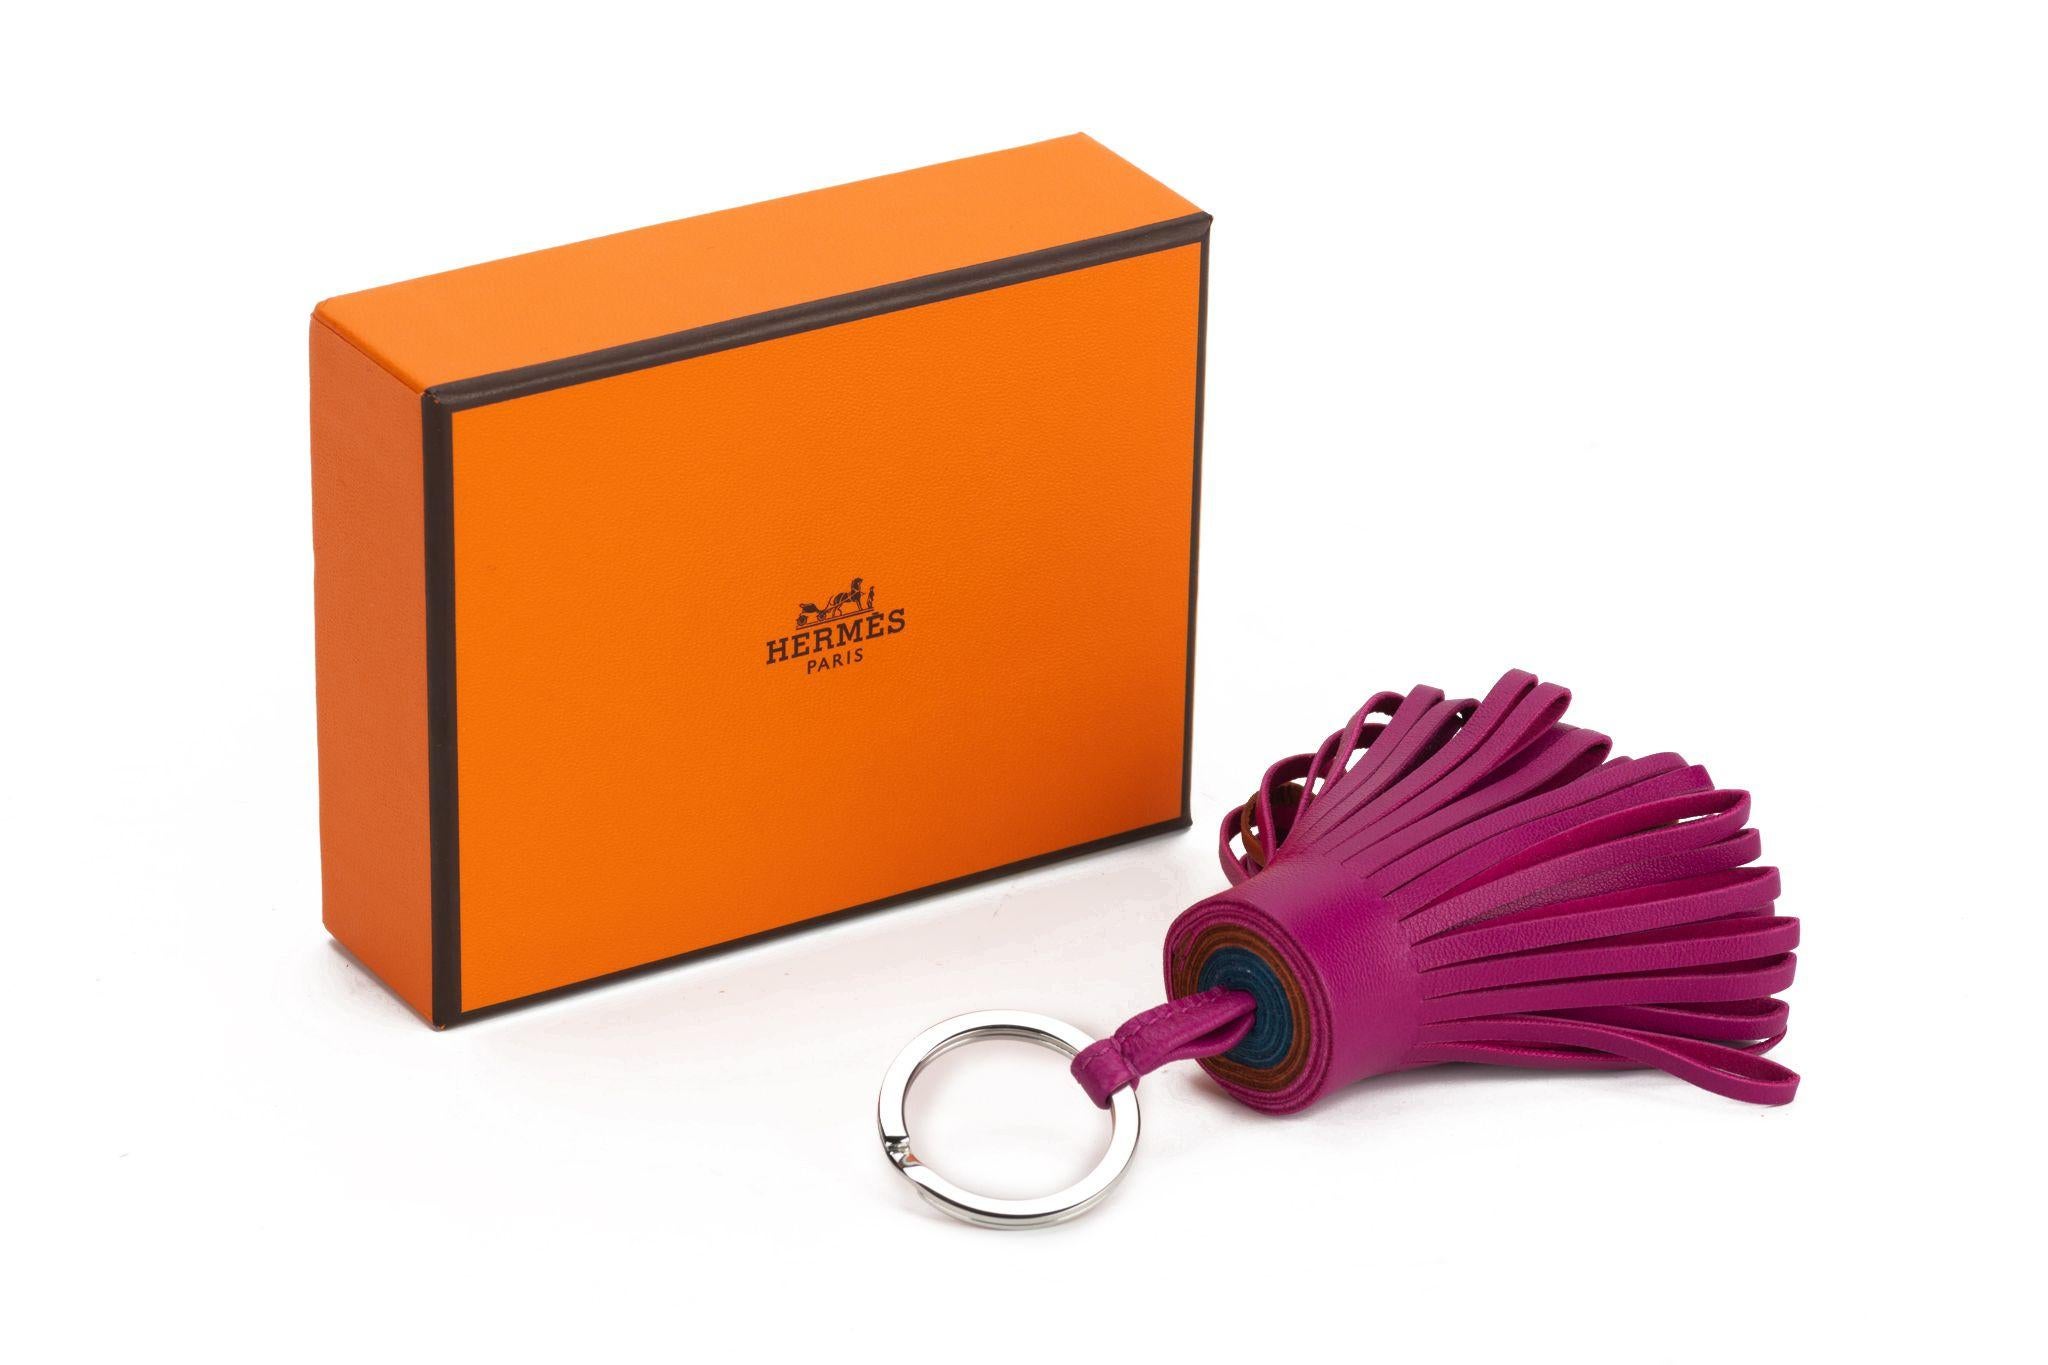 Hermès Carmen Key Ring. Tricolor key ring in Milo lambskin with stainless steel hardware. The item is new and comes with the original box.